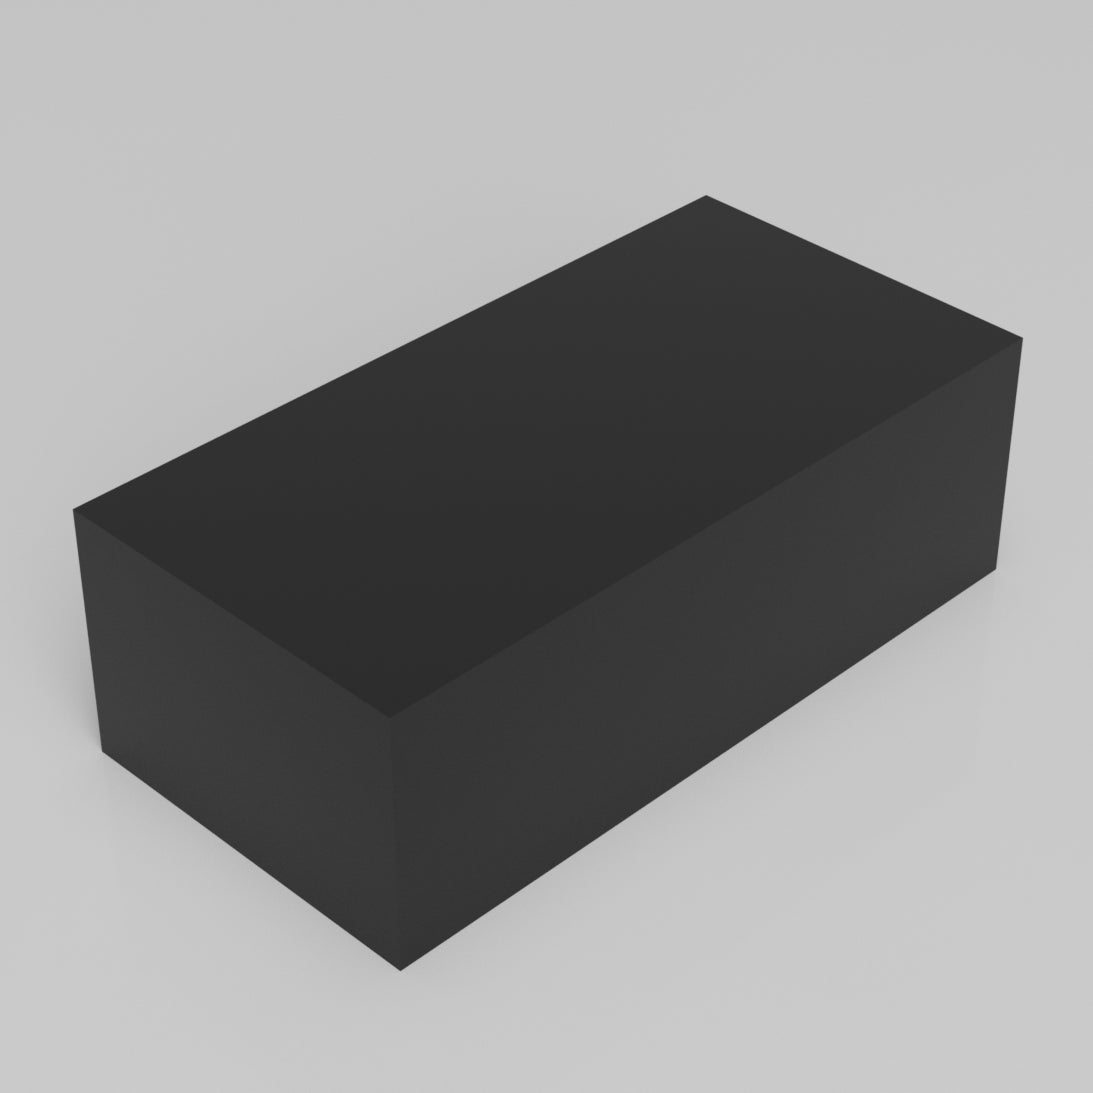 Machinable Wax Rectangular Block Front View 2 Inch by 3 Inch by 6 Inch